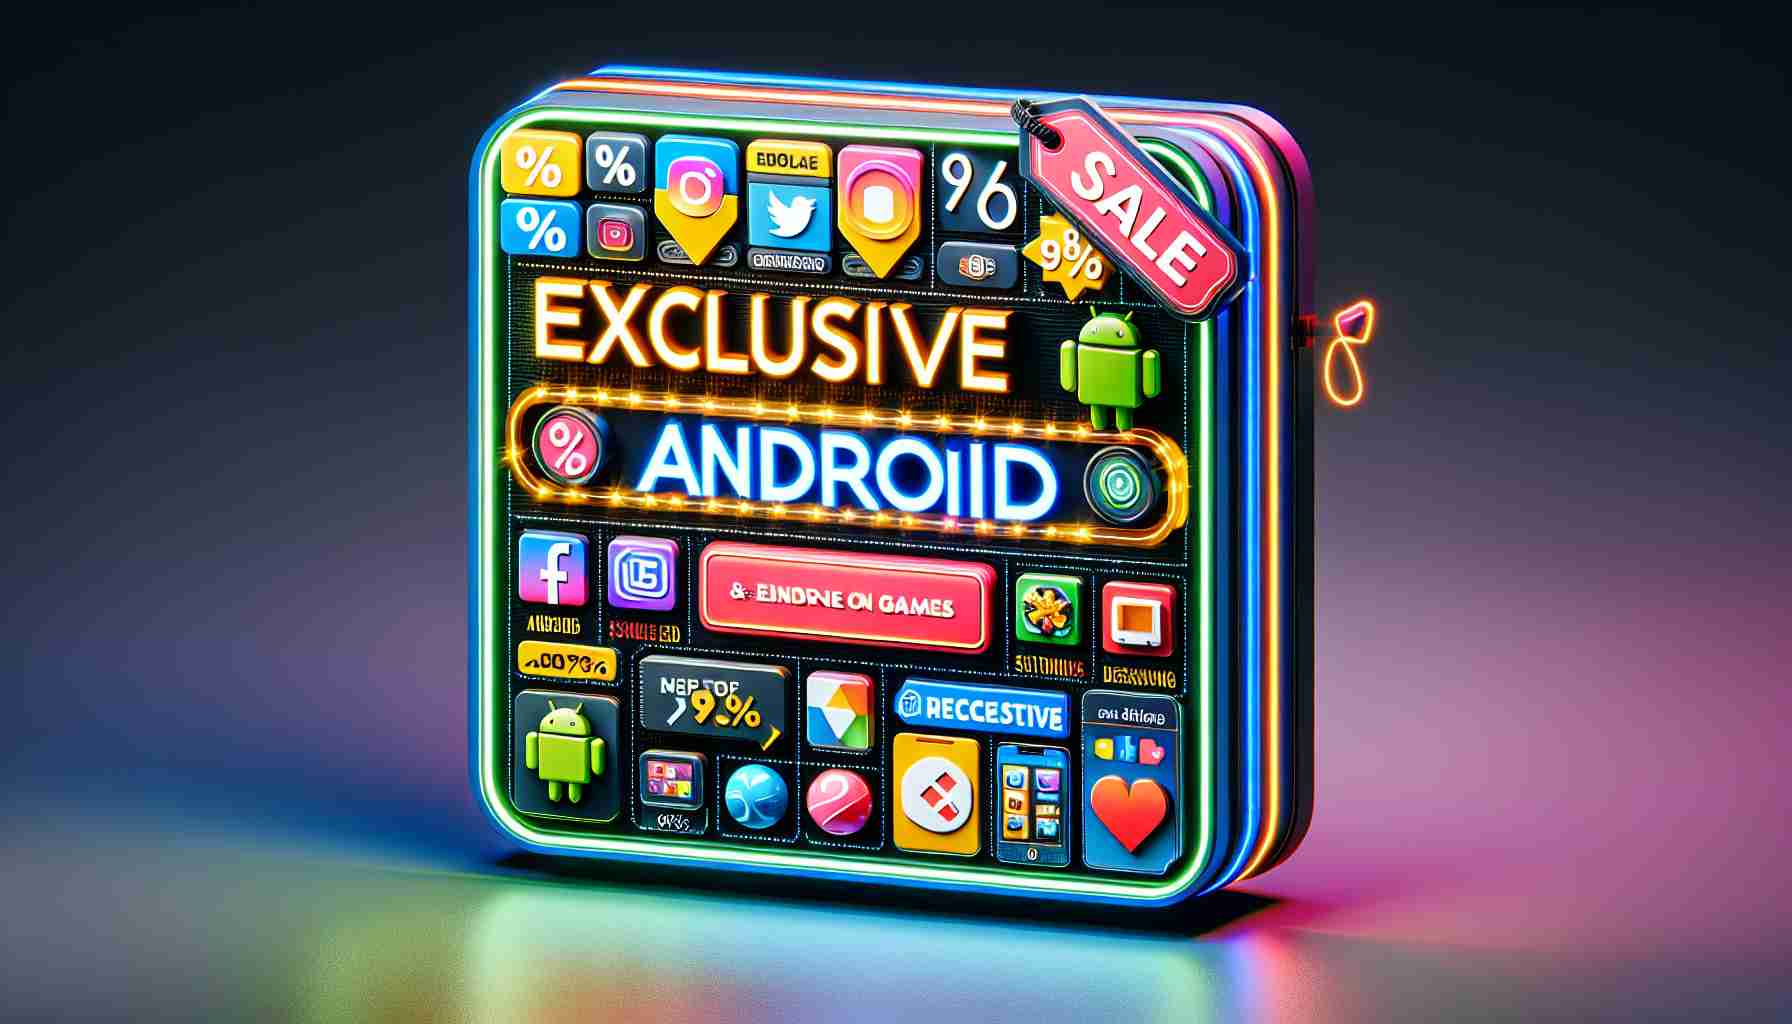 App Store Deals and Promo Codes - 9to5Toys